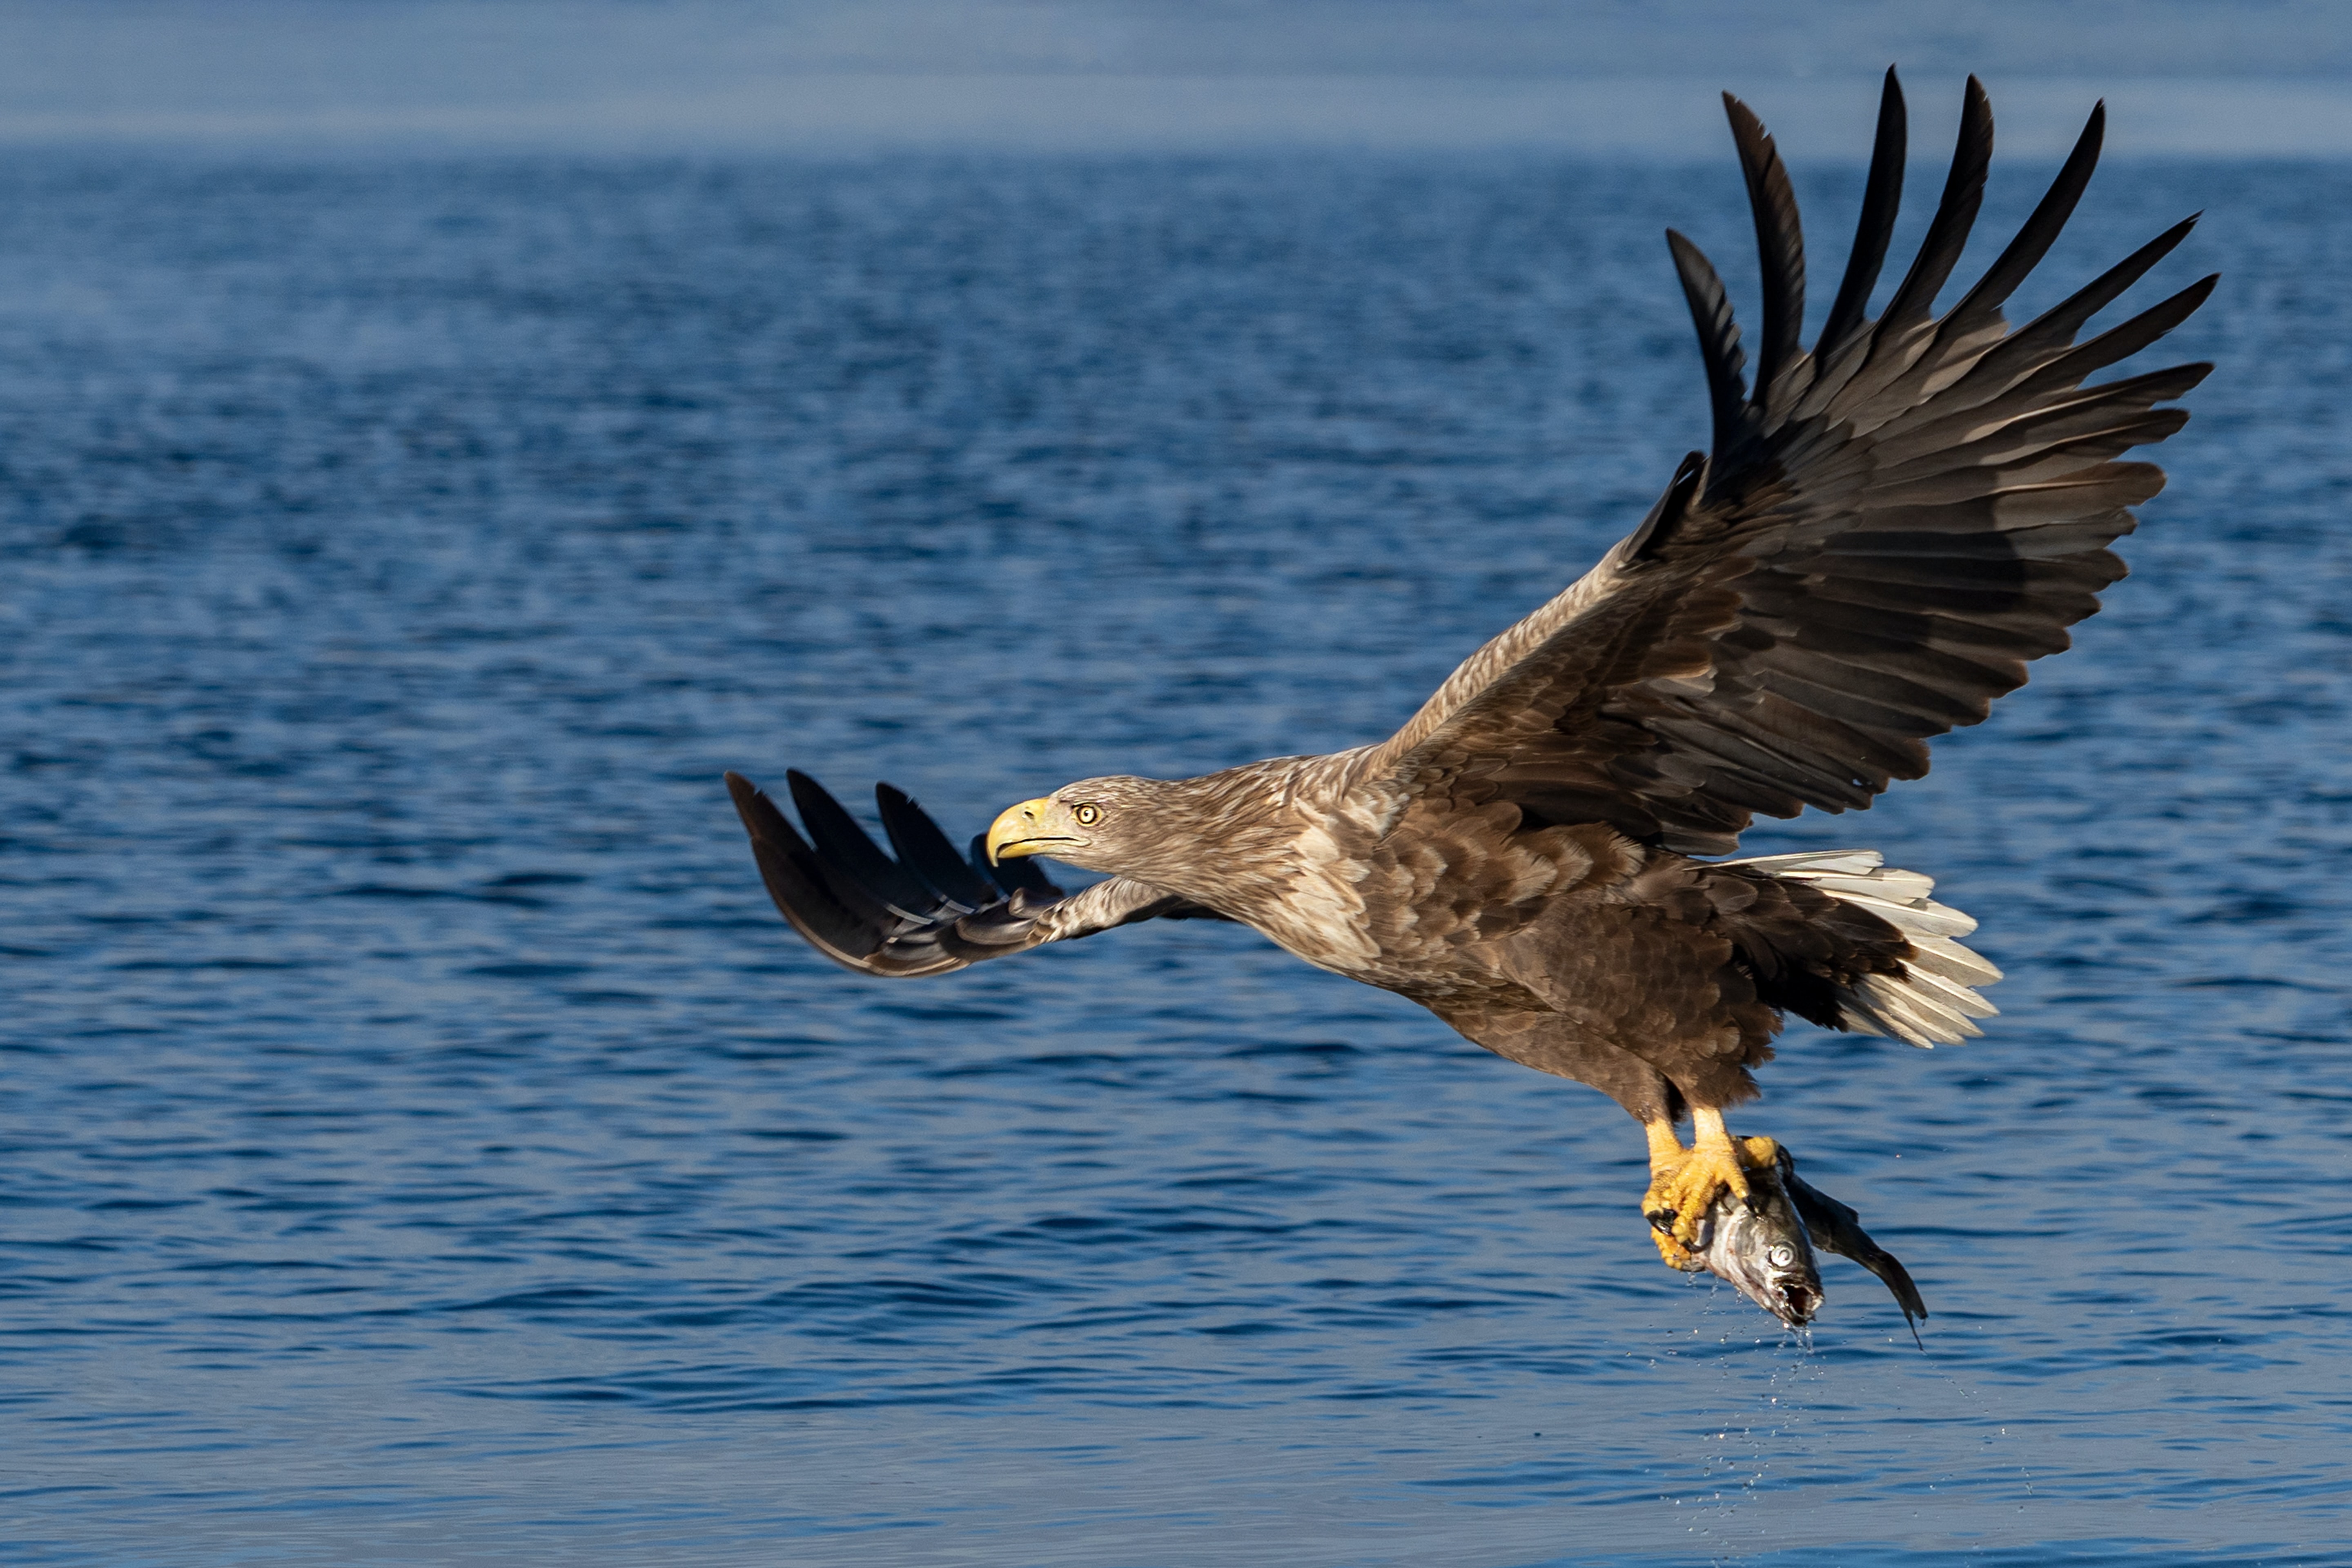 Sea eagle flying over the sea with a fish in its talons